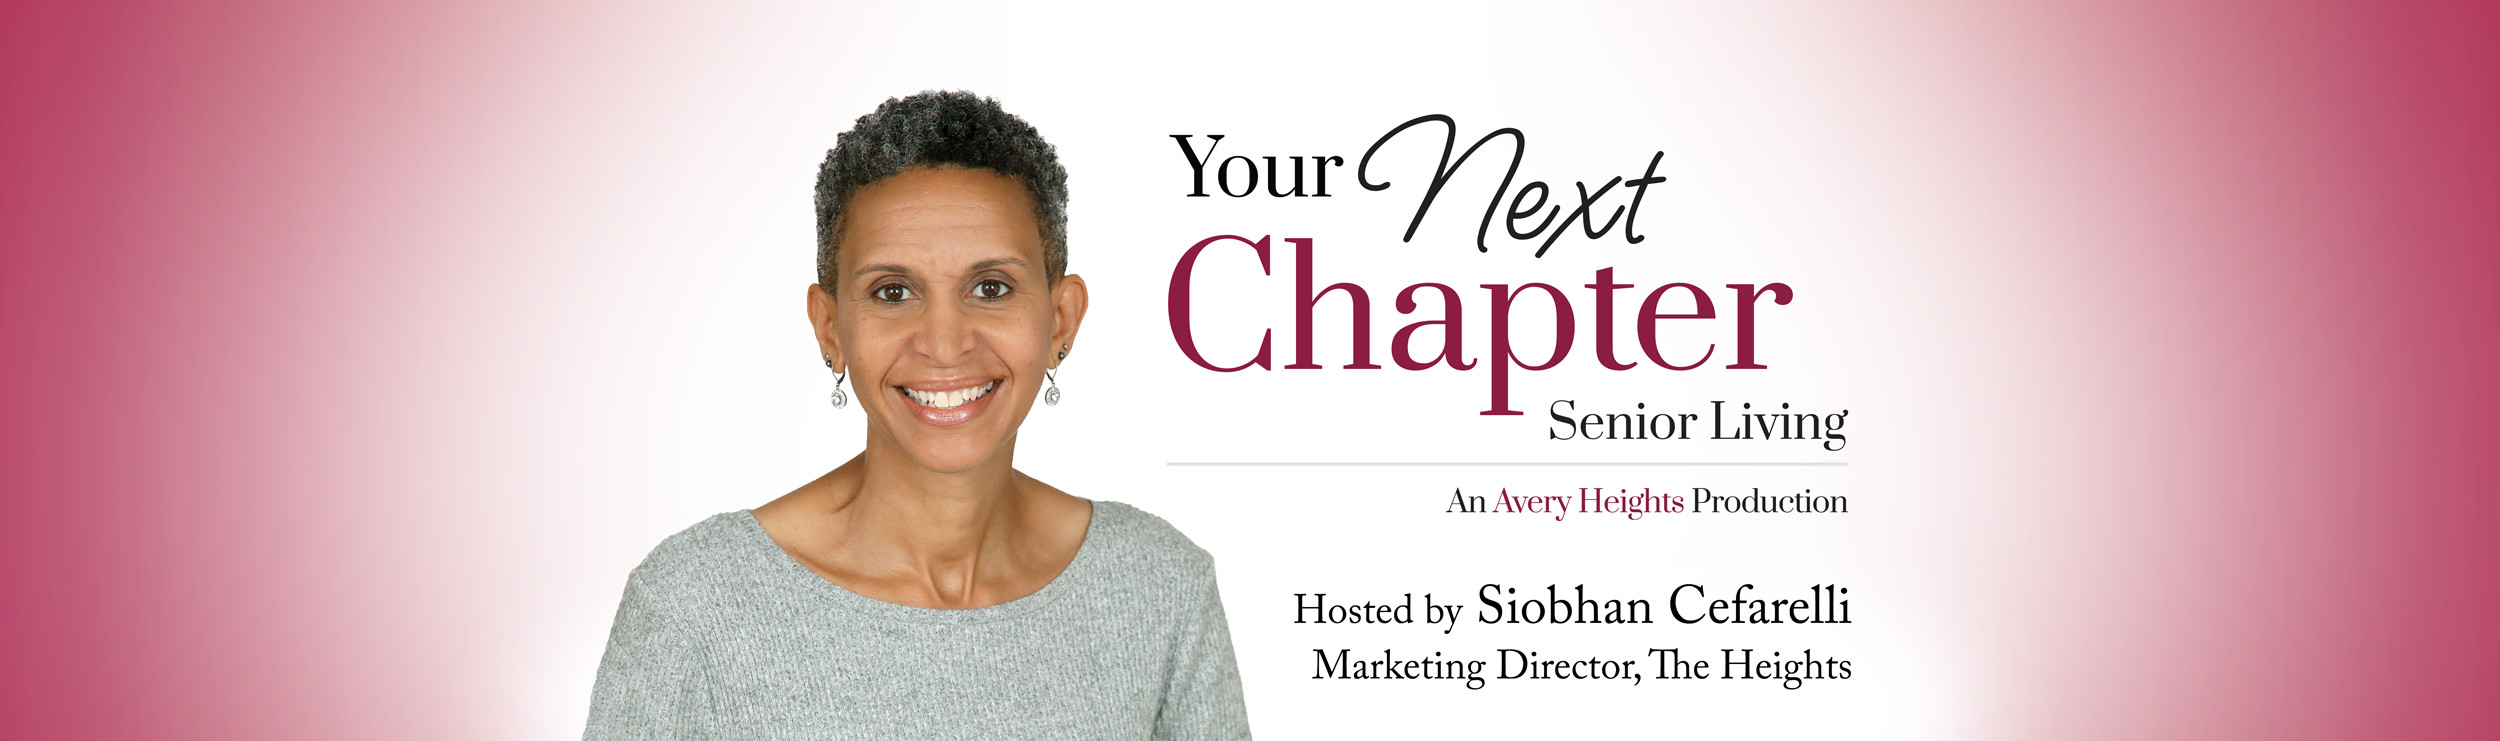 Your Next Chapter Senior Living, An Avery Heights Production. Hosted by Siobhan Cefarelli, Marketing Director, The Heights.